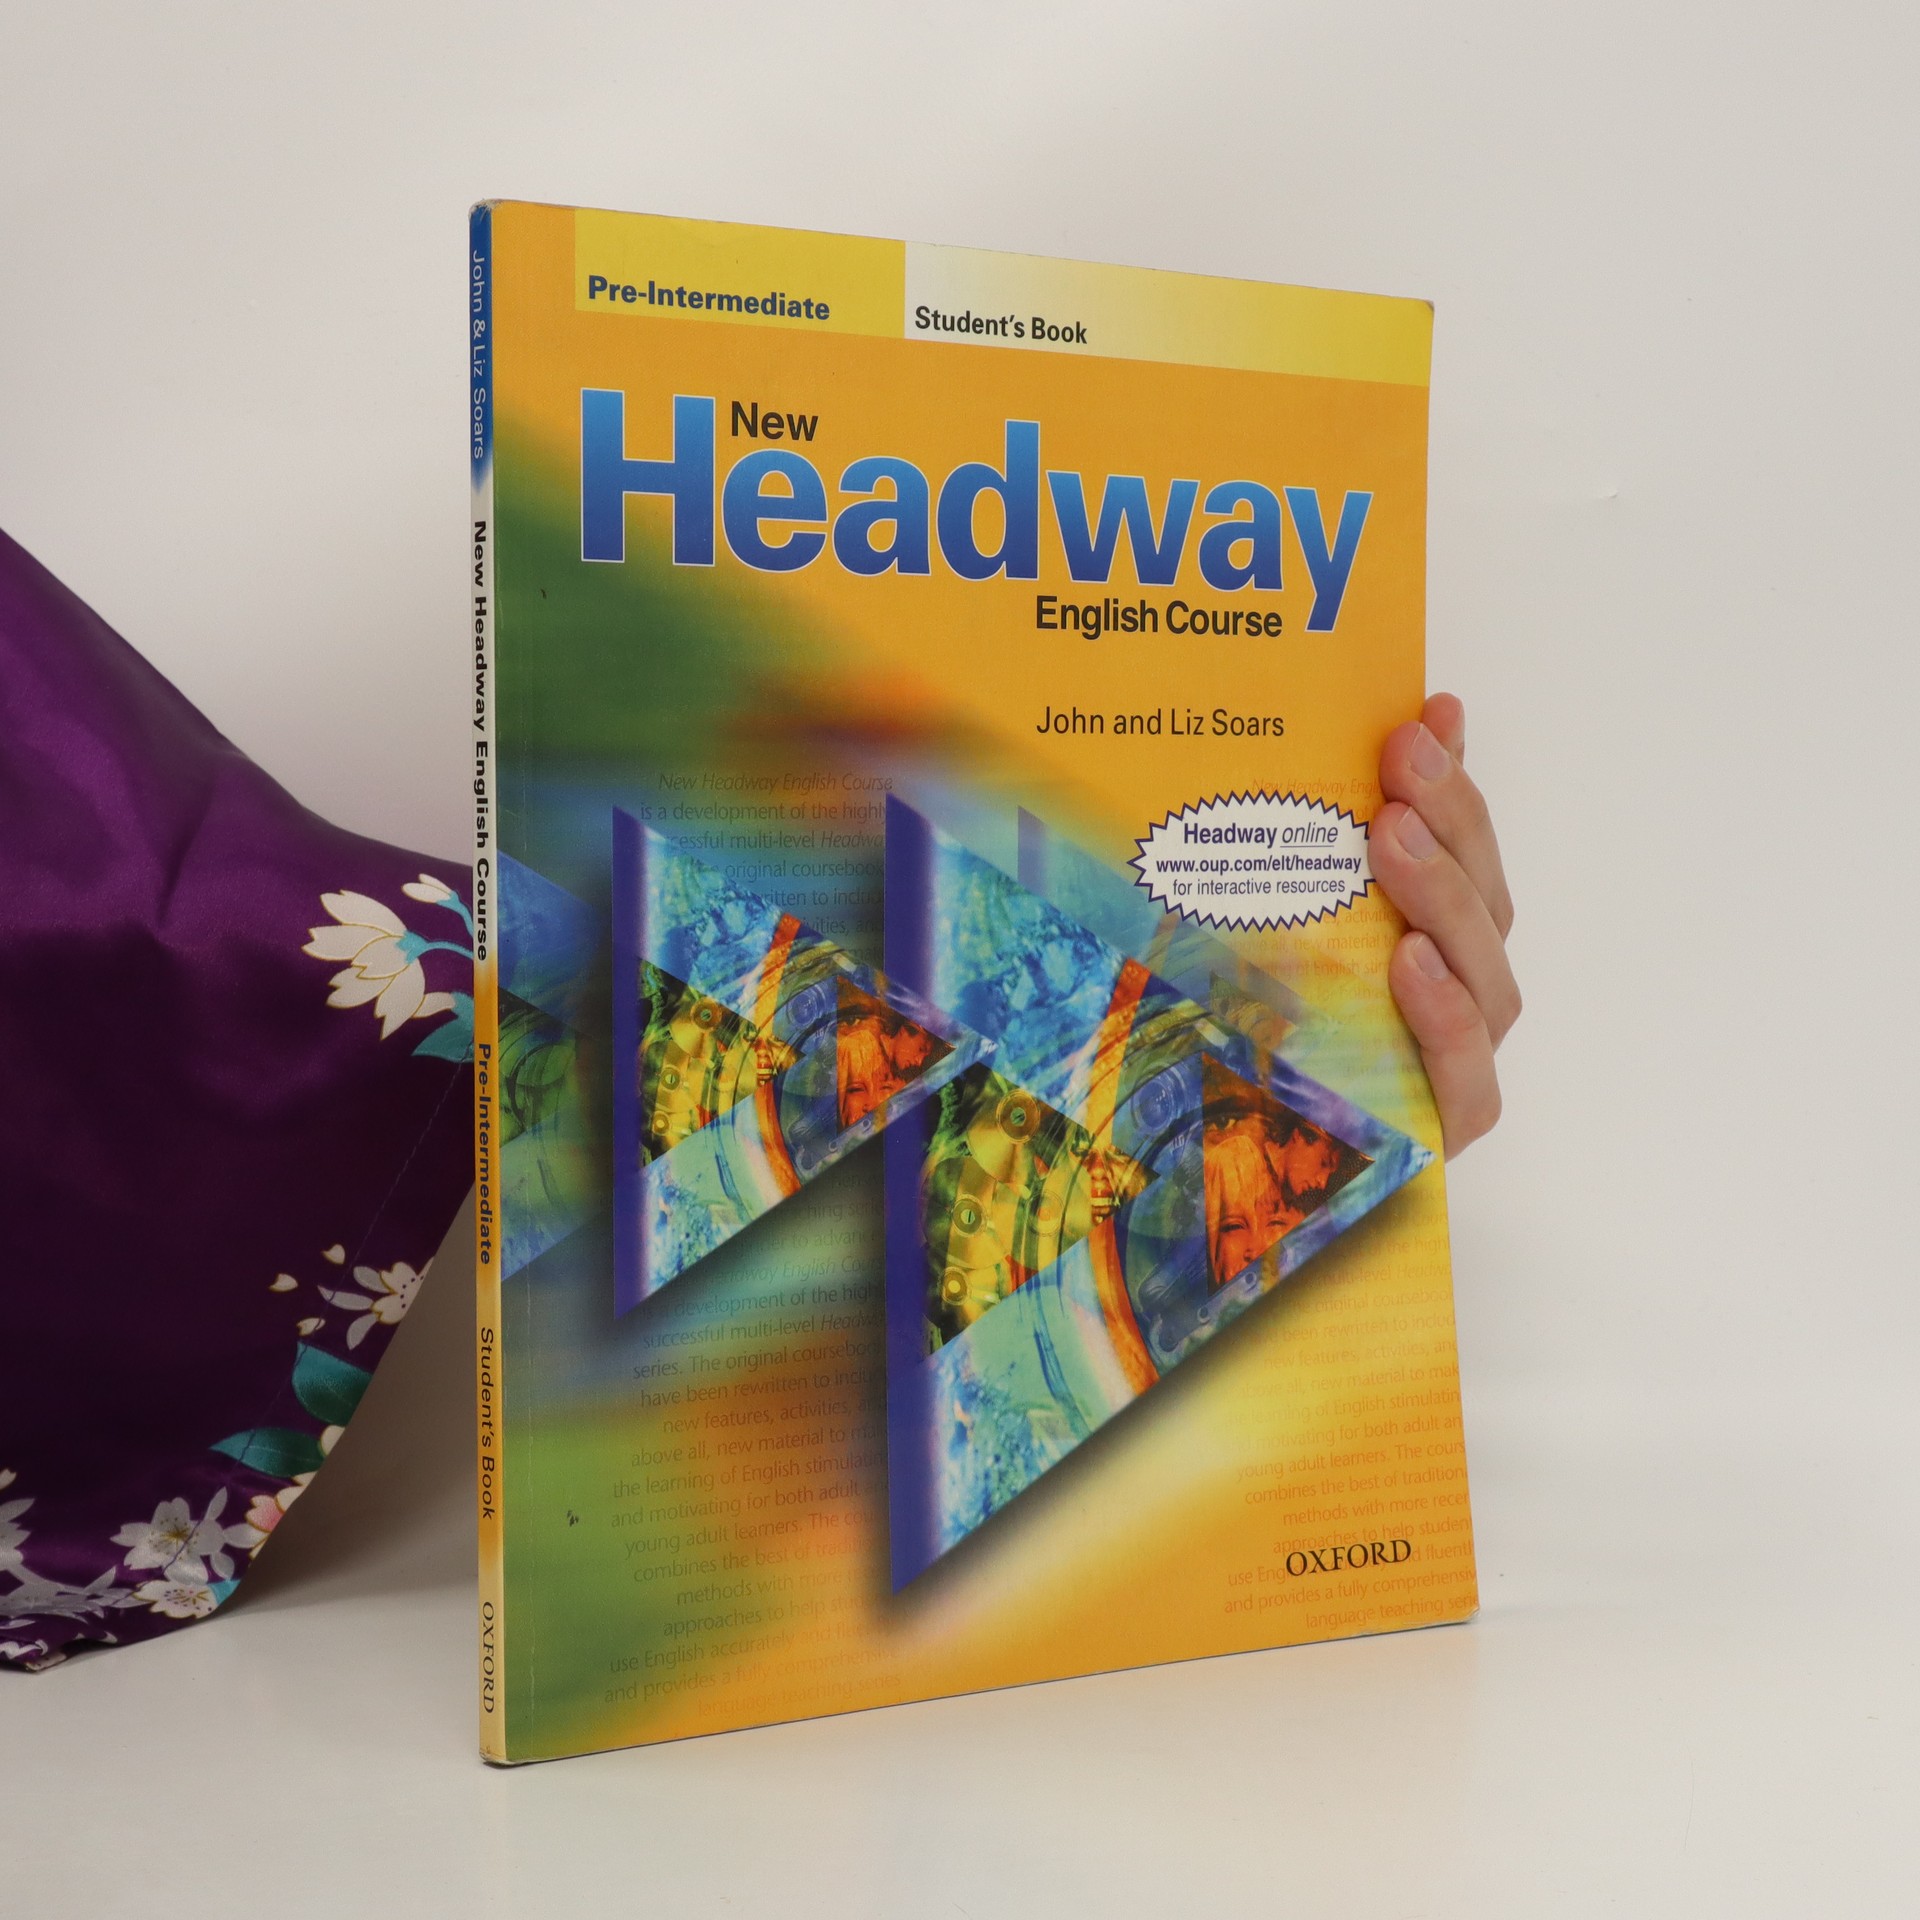 Headway elementary student s. Headway pre-Intermediate student's book. Headway books. Pioneer pre Intermediate students book. Intermediate student's book 2h.